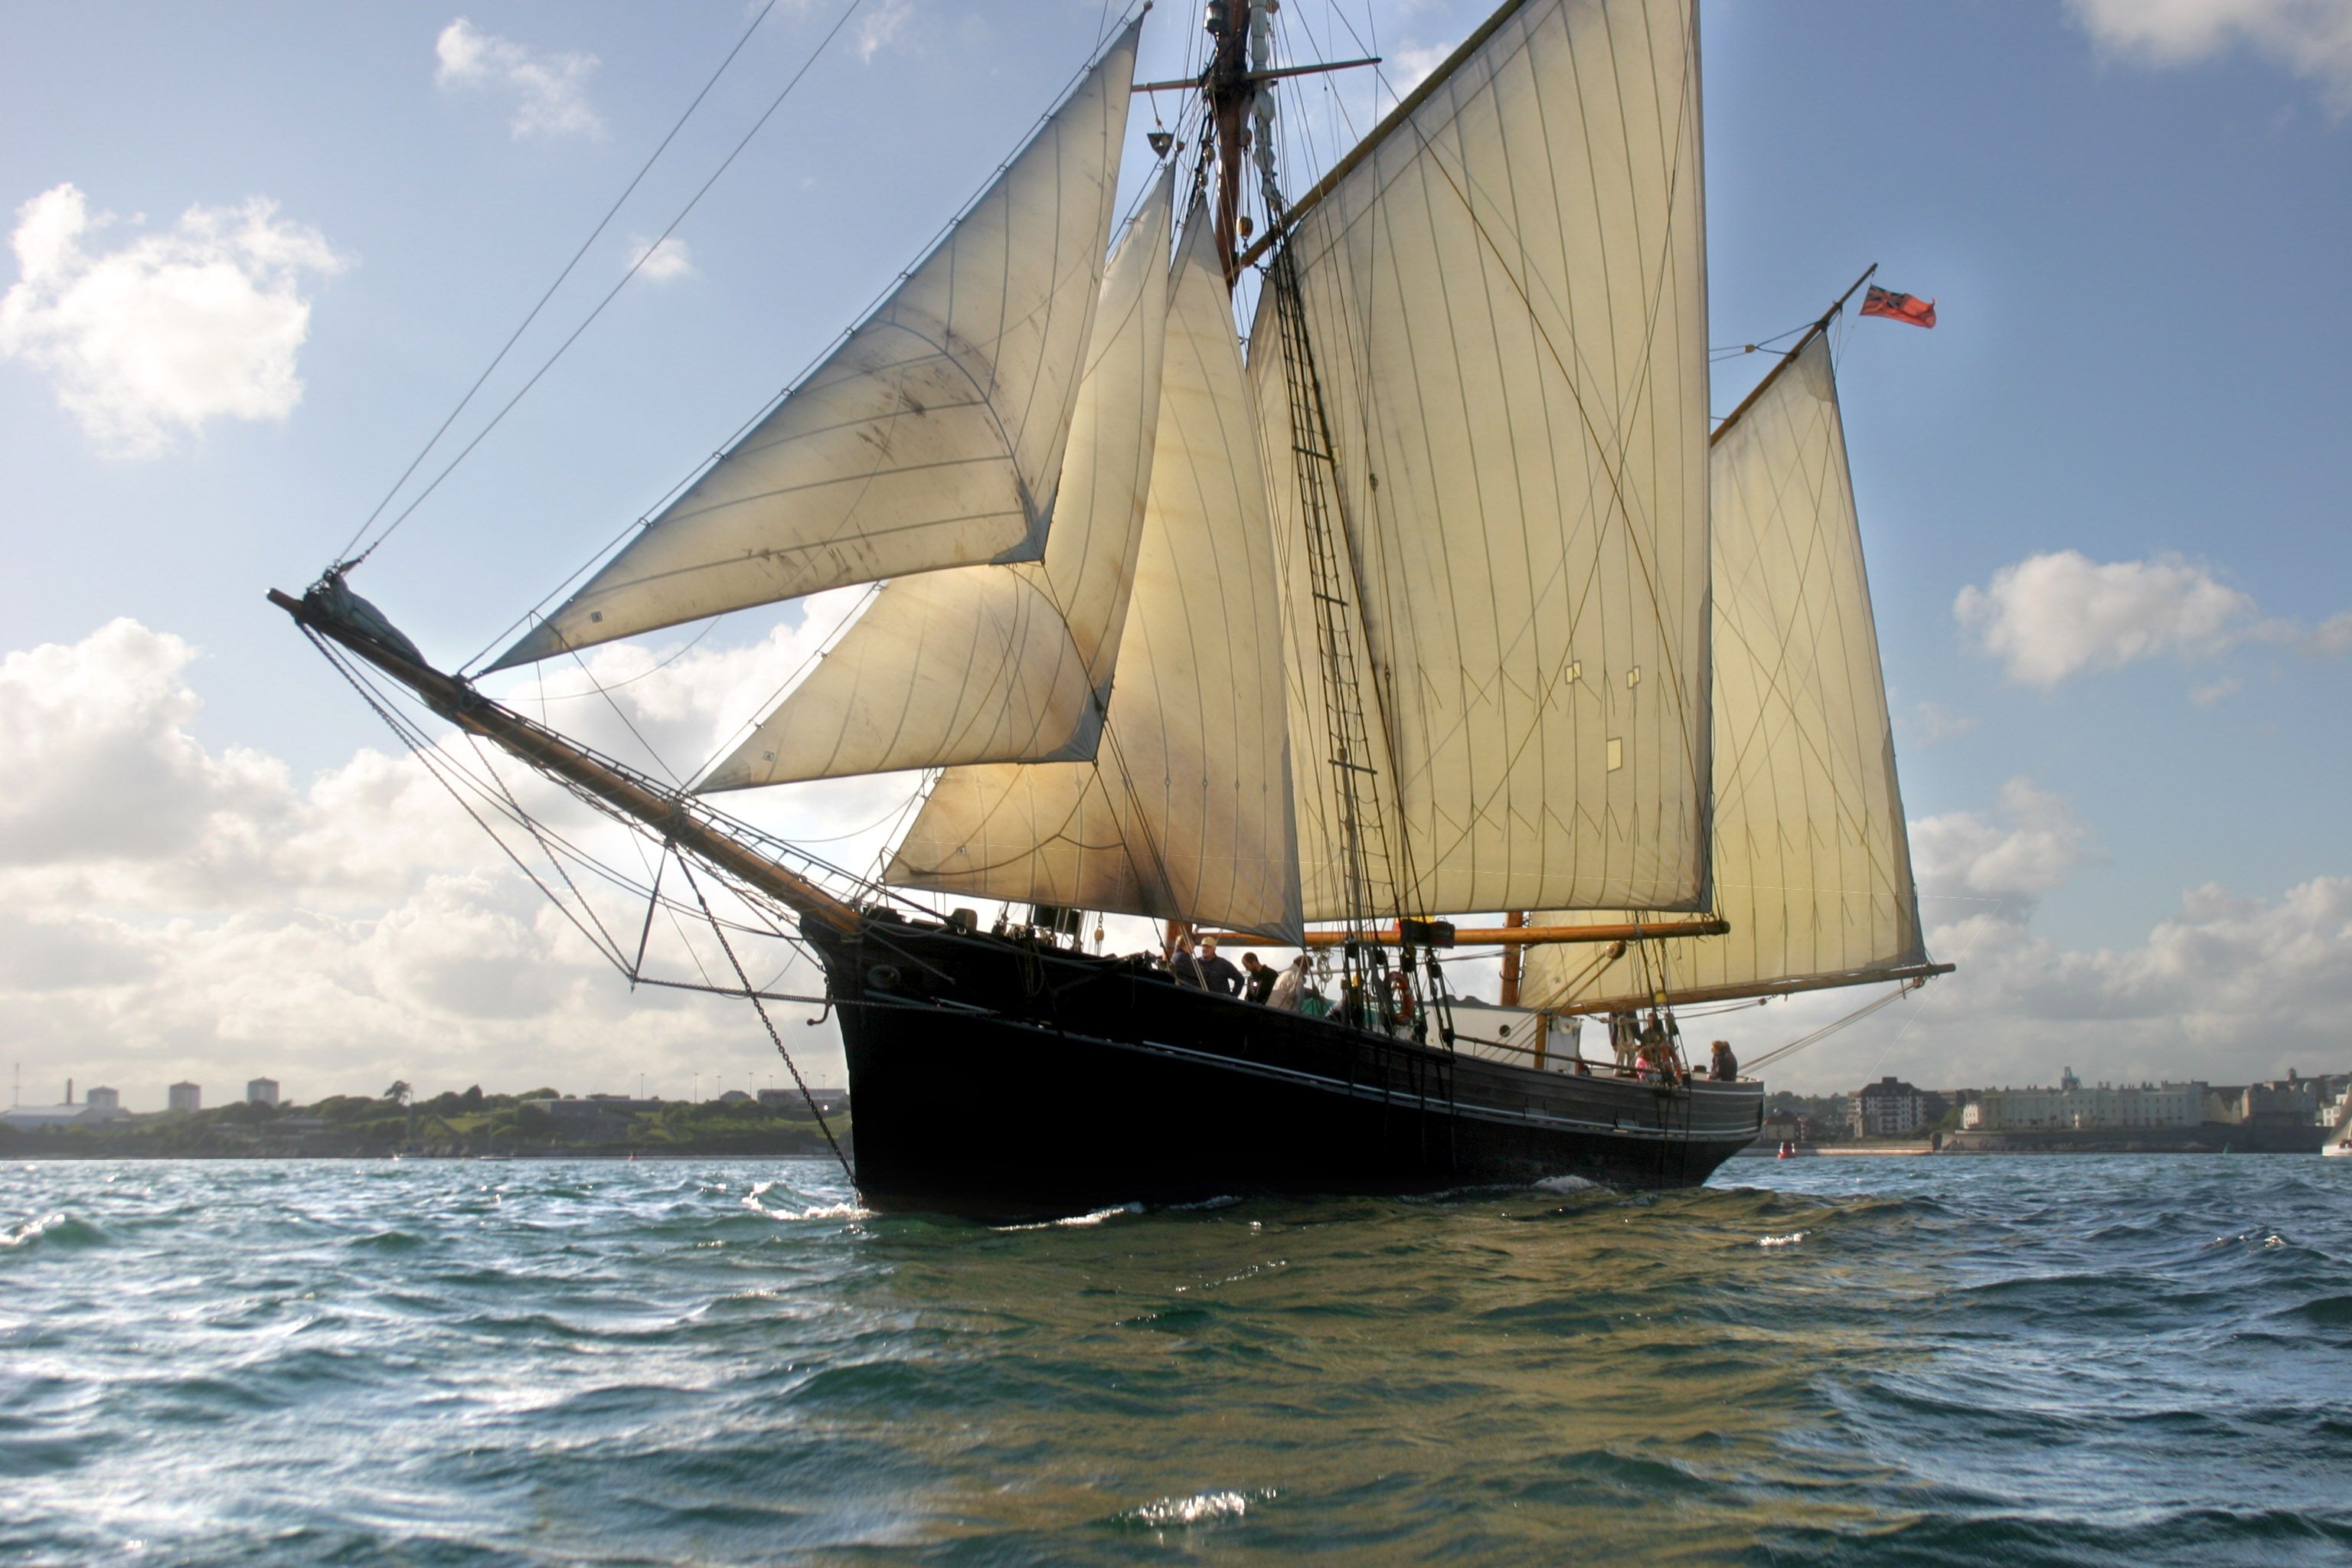 West Country Trading Ketch. | Trading ketch | Pinterest | Sailing ships